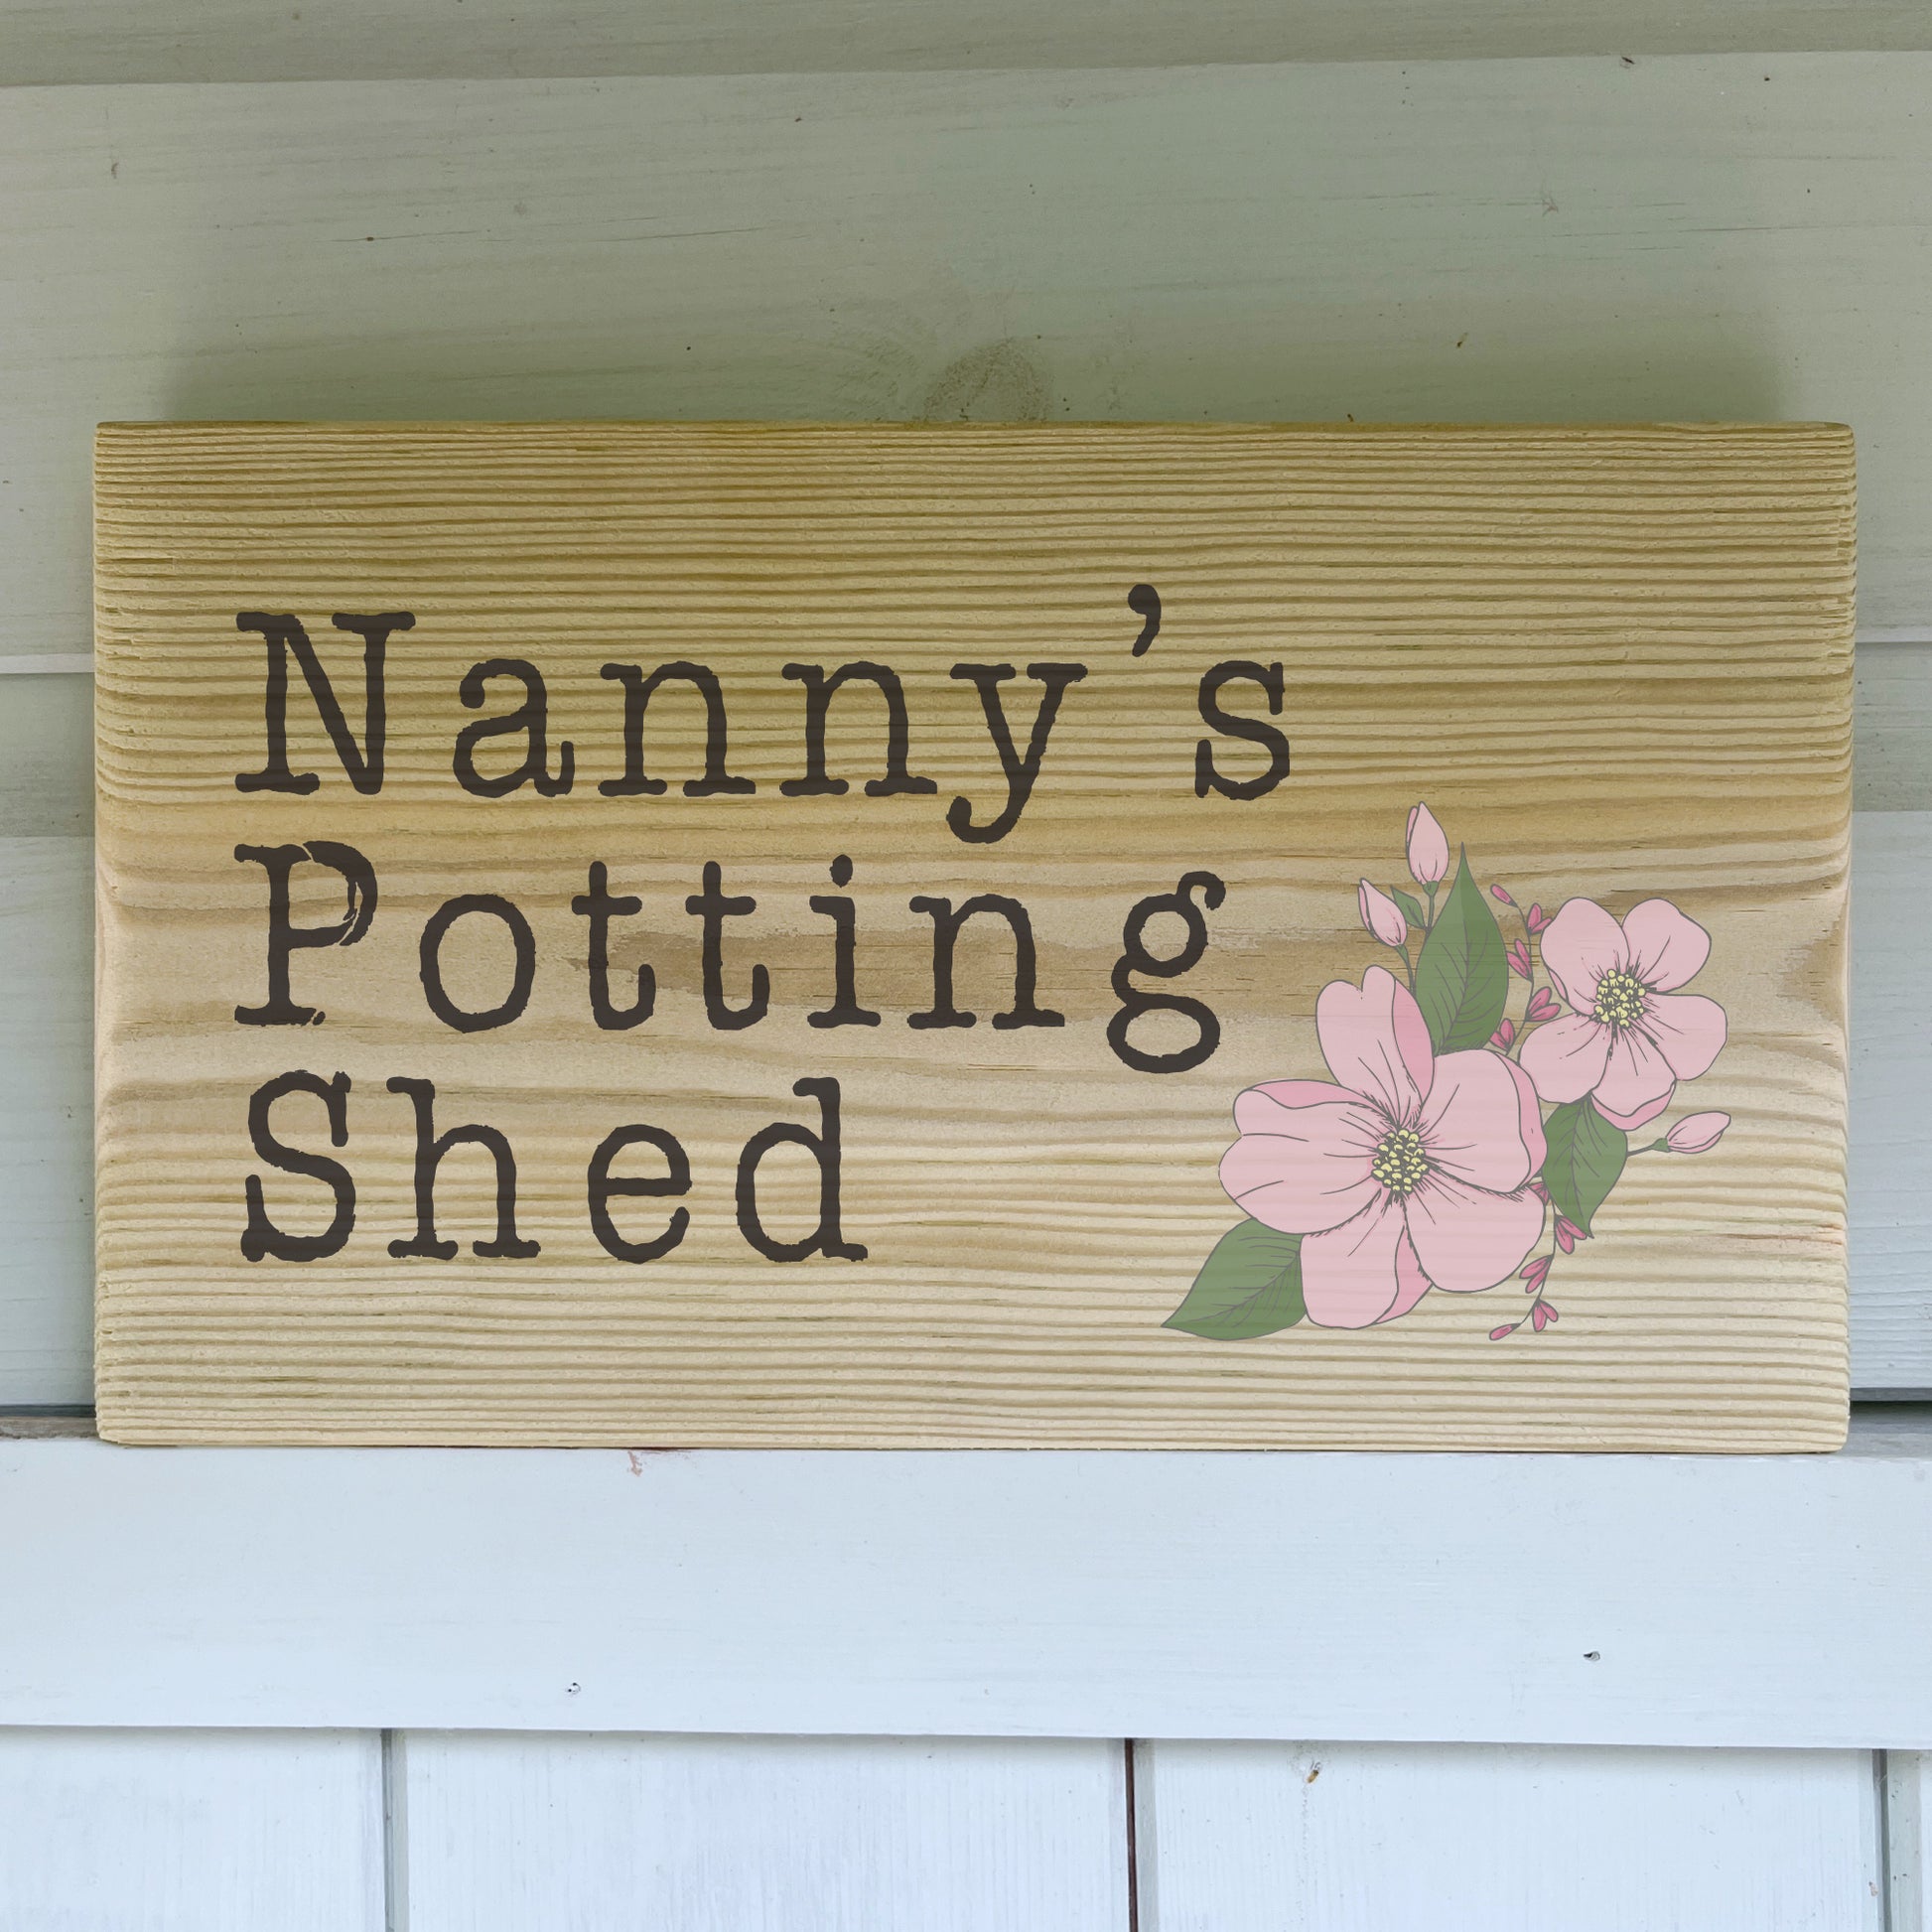 Personalised wooden potting shed sign. All images and designs © Slice of Pie Designs